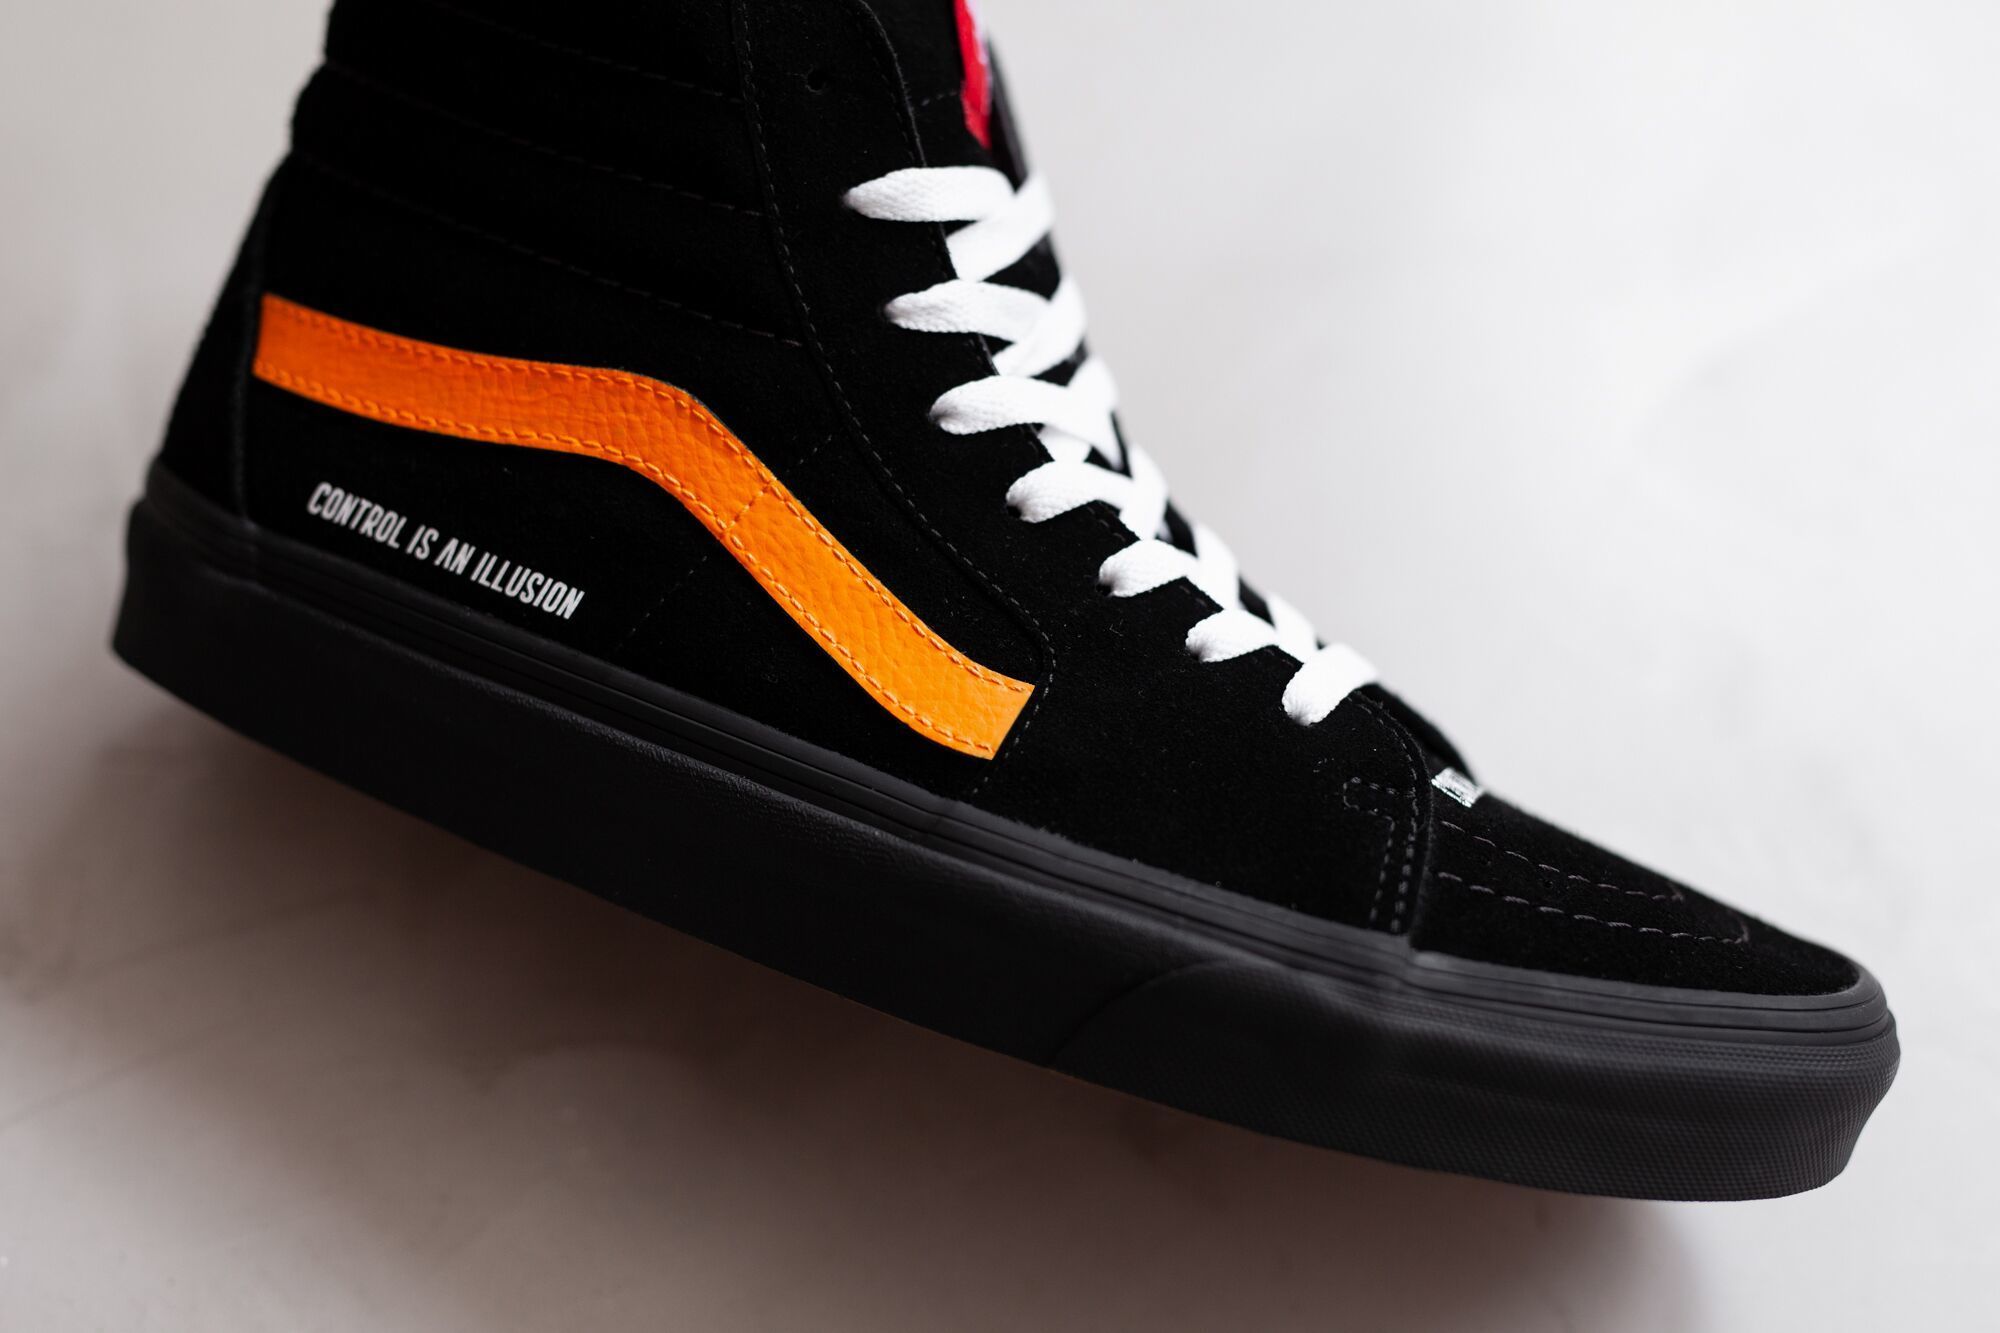 x vans old skool control is an illusion